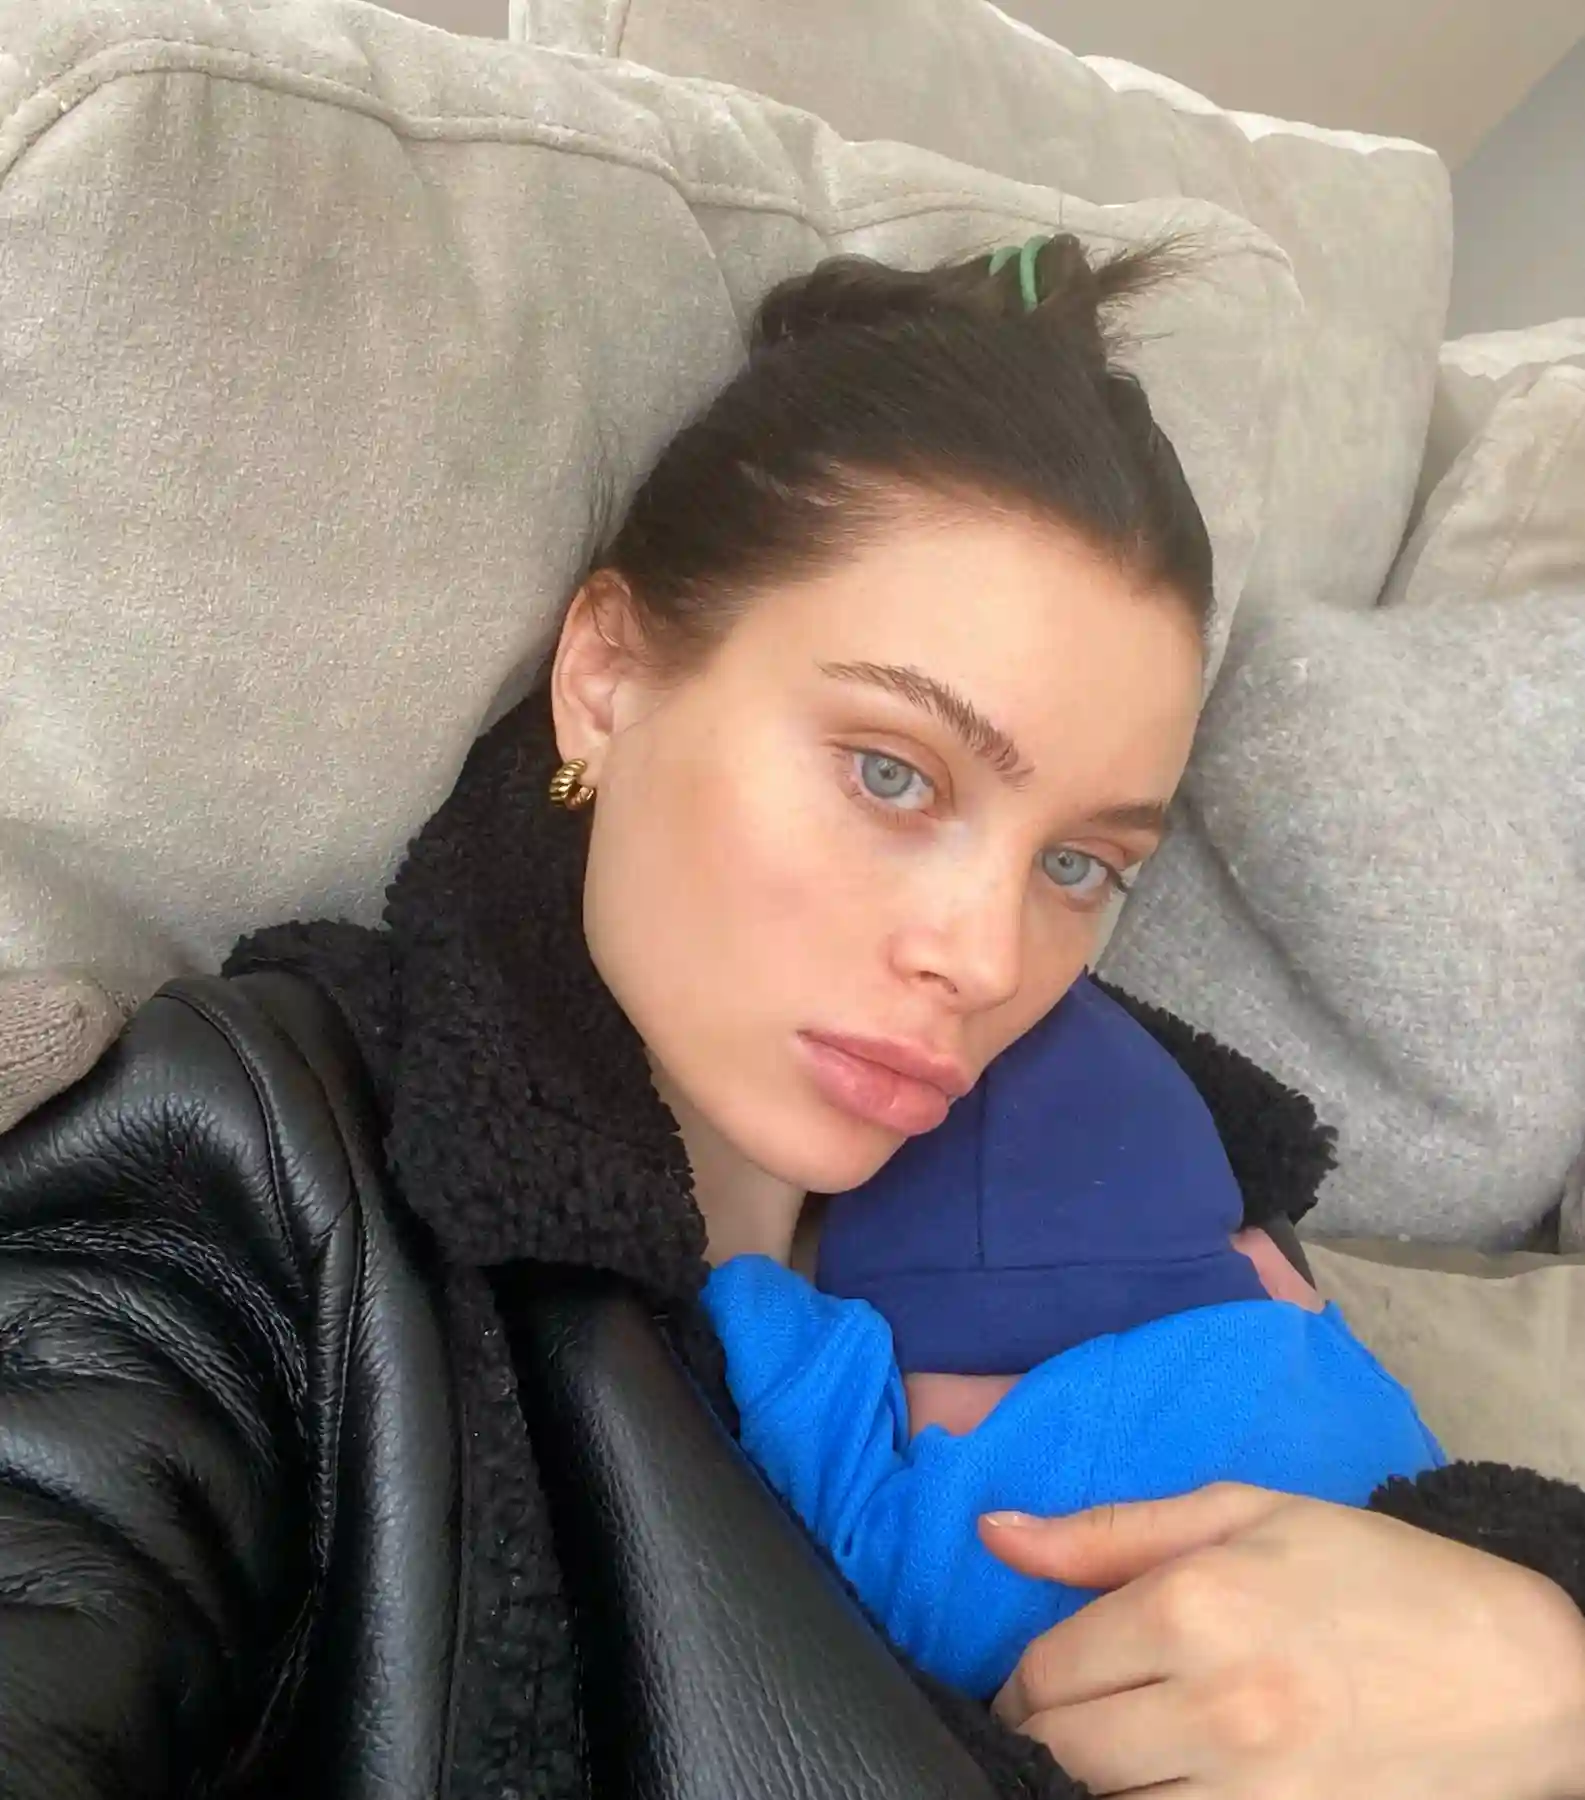 Lana Rhoades with her baby 1